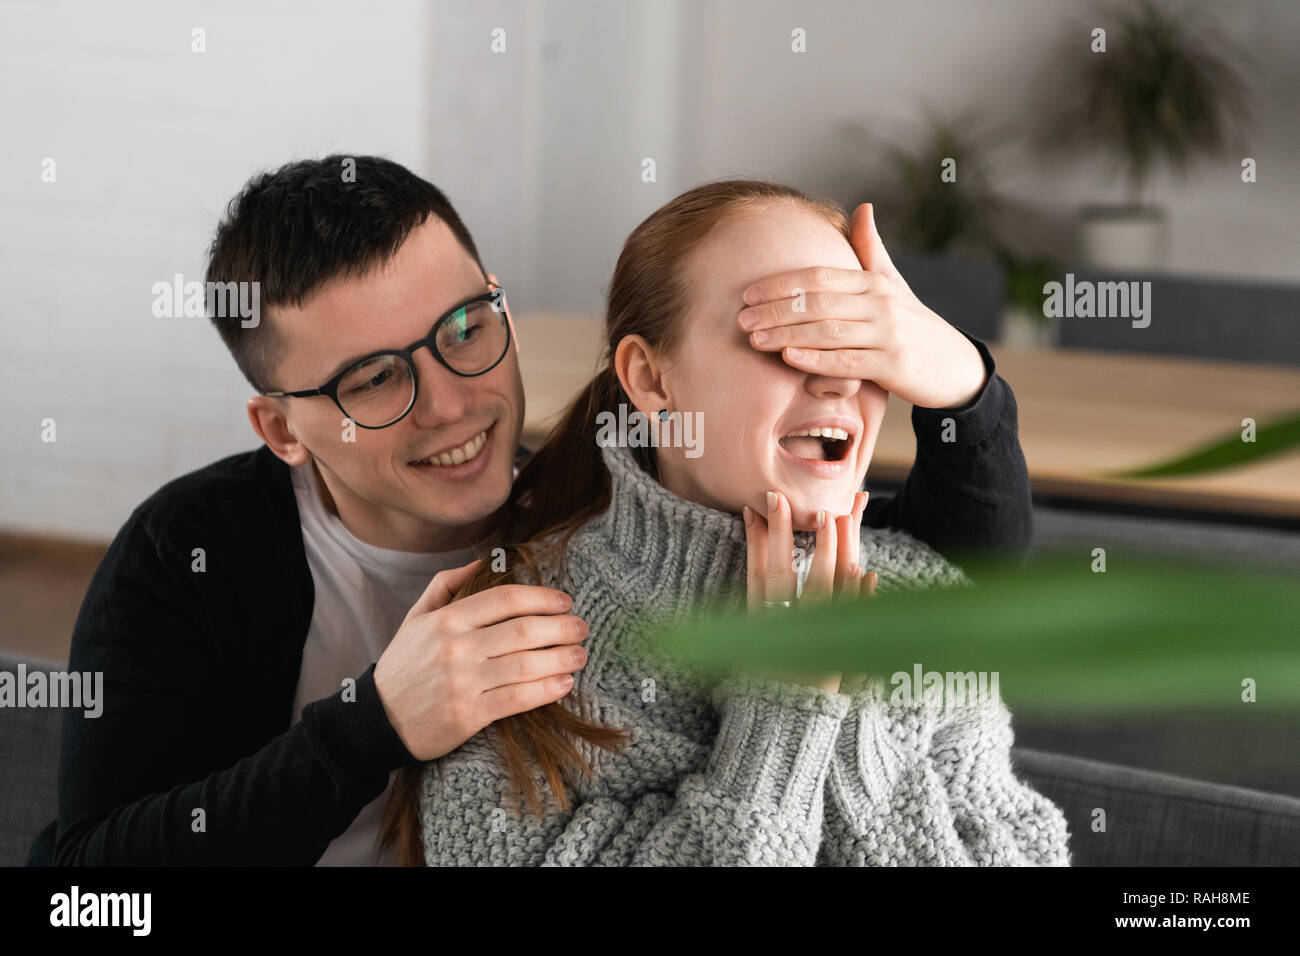 Surprise Beautiful romantic couple in cafe. Man is covering his girlfriend's eyes while she waiting for a surprise Stock Photo